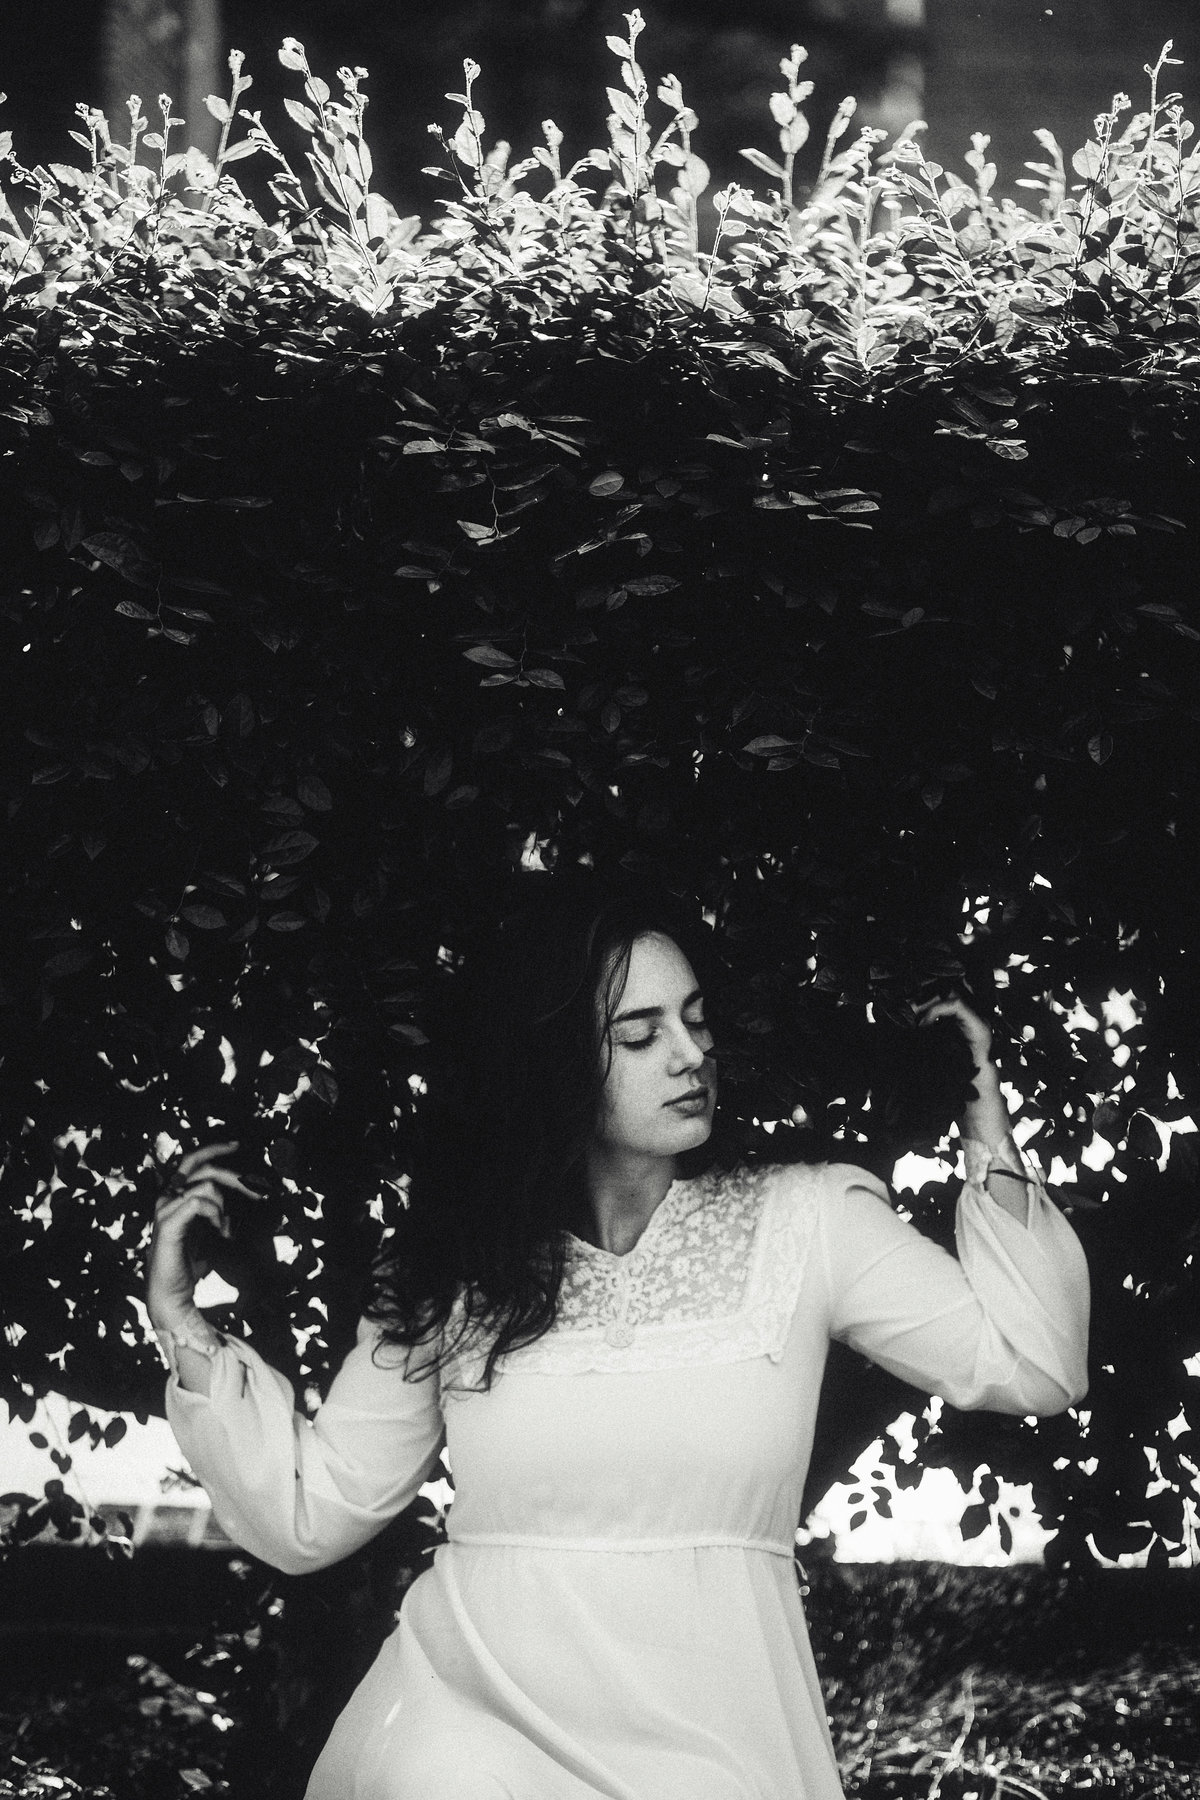 Portrait Photo Of Young Woman In Dress Surrounded By Bushes Black And White Los Angeles